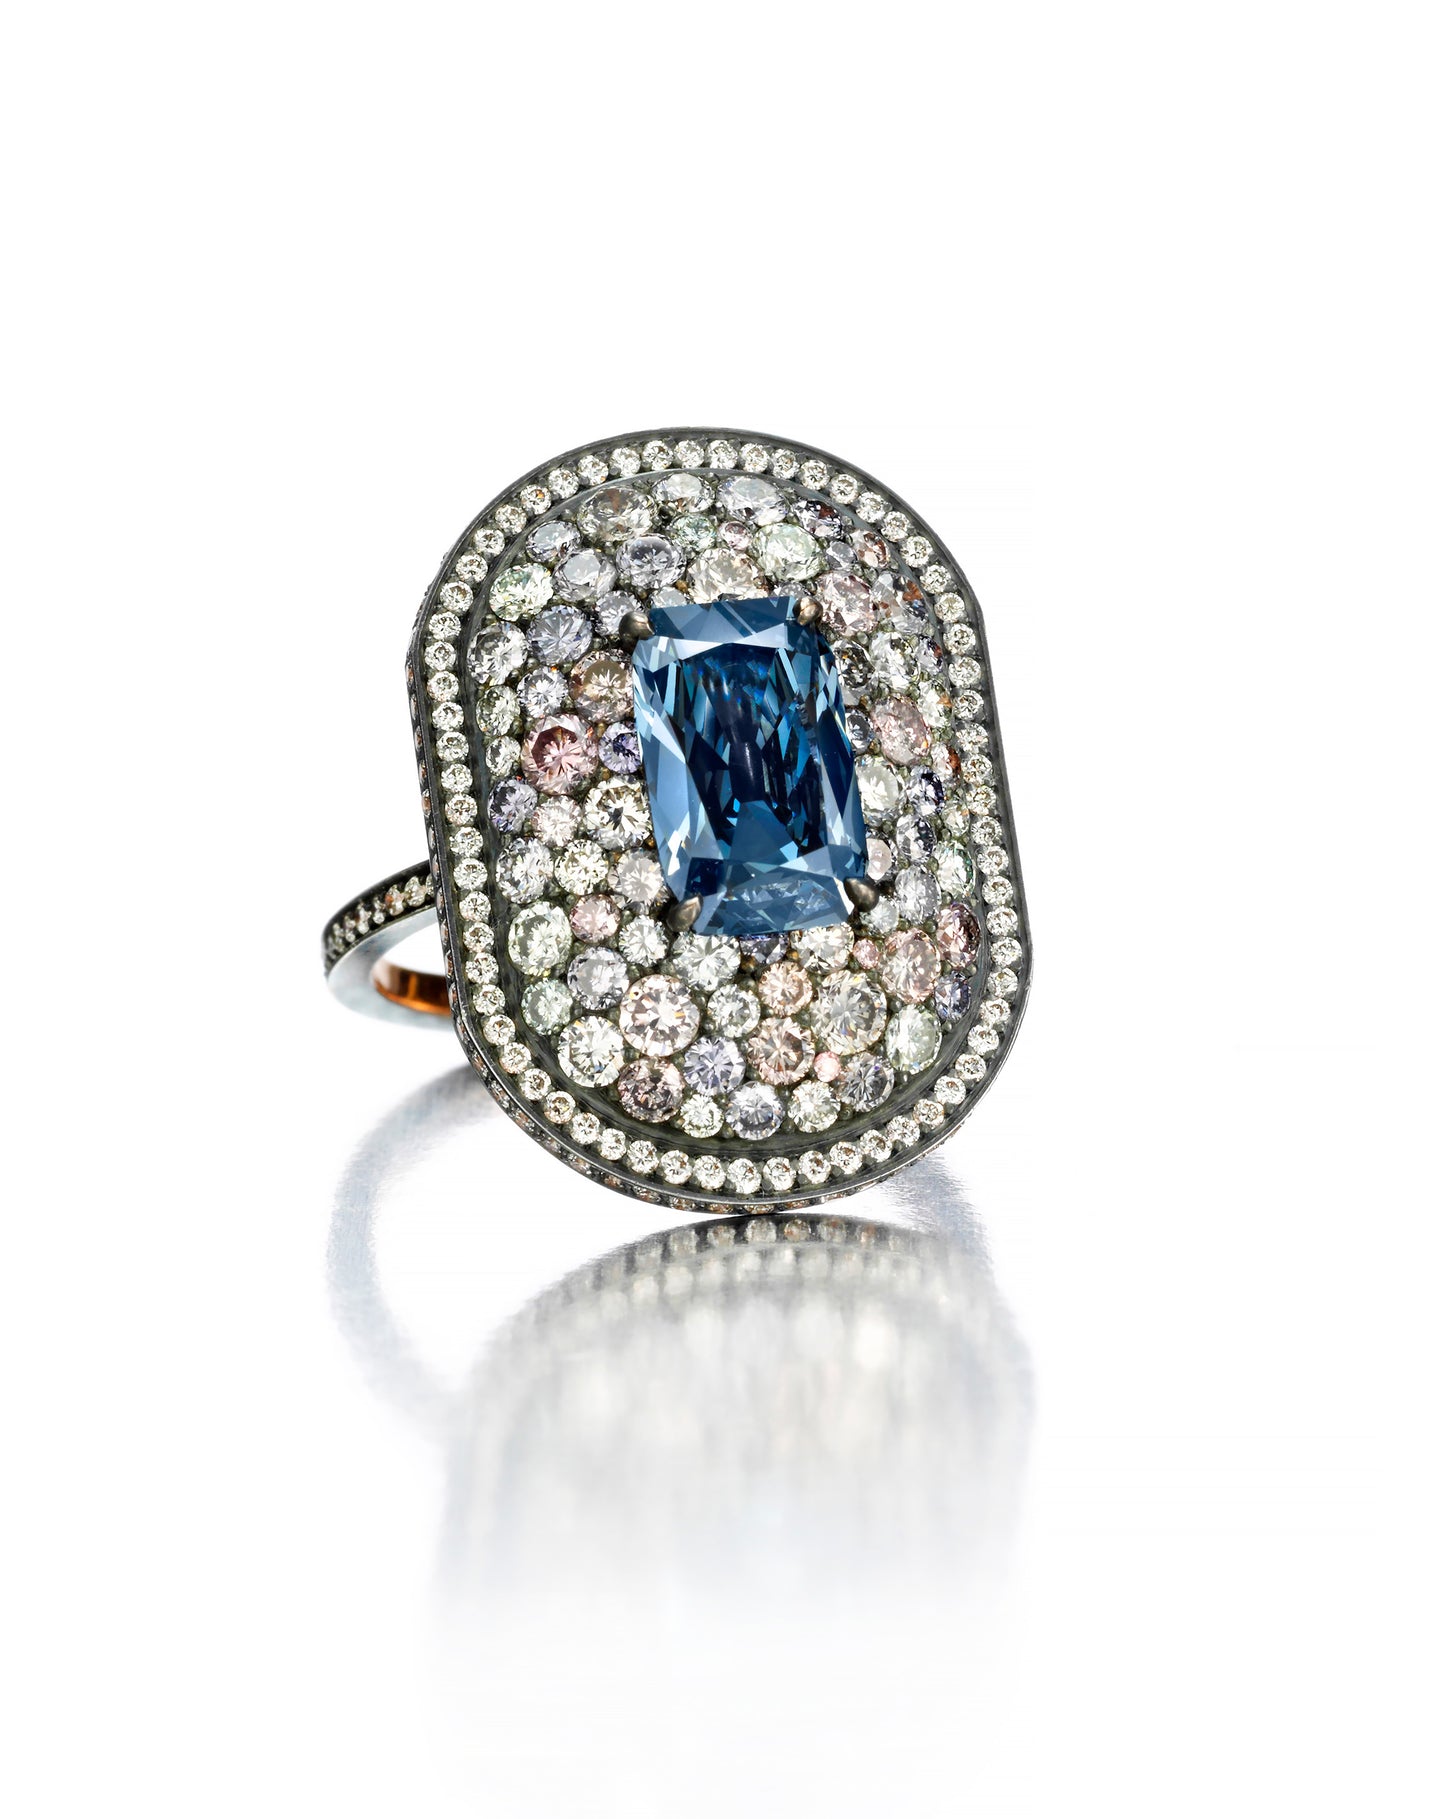 BLUE  DIAMOND  AND  MULTI-COLORED  DIAMOND  RING BY  LAUREN  ADRIANA  FOR  SIEGELSON,  NEW  YORK